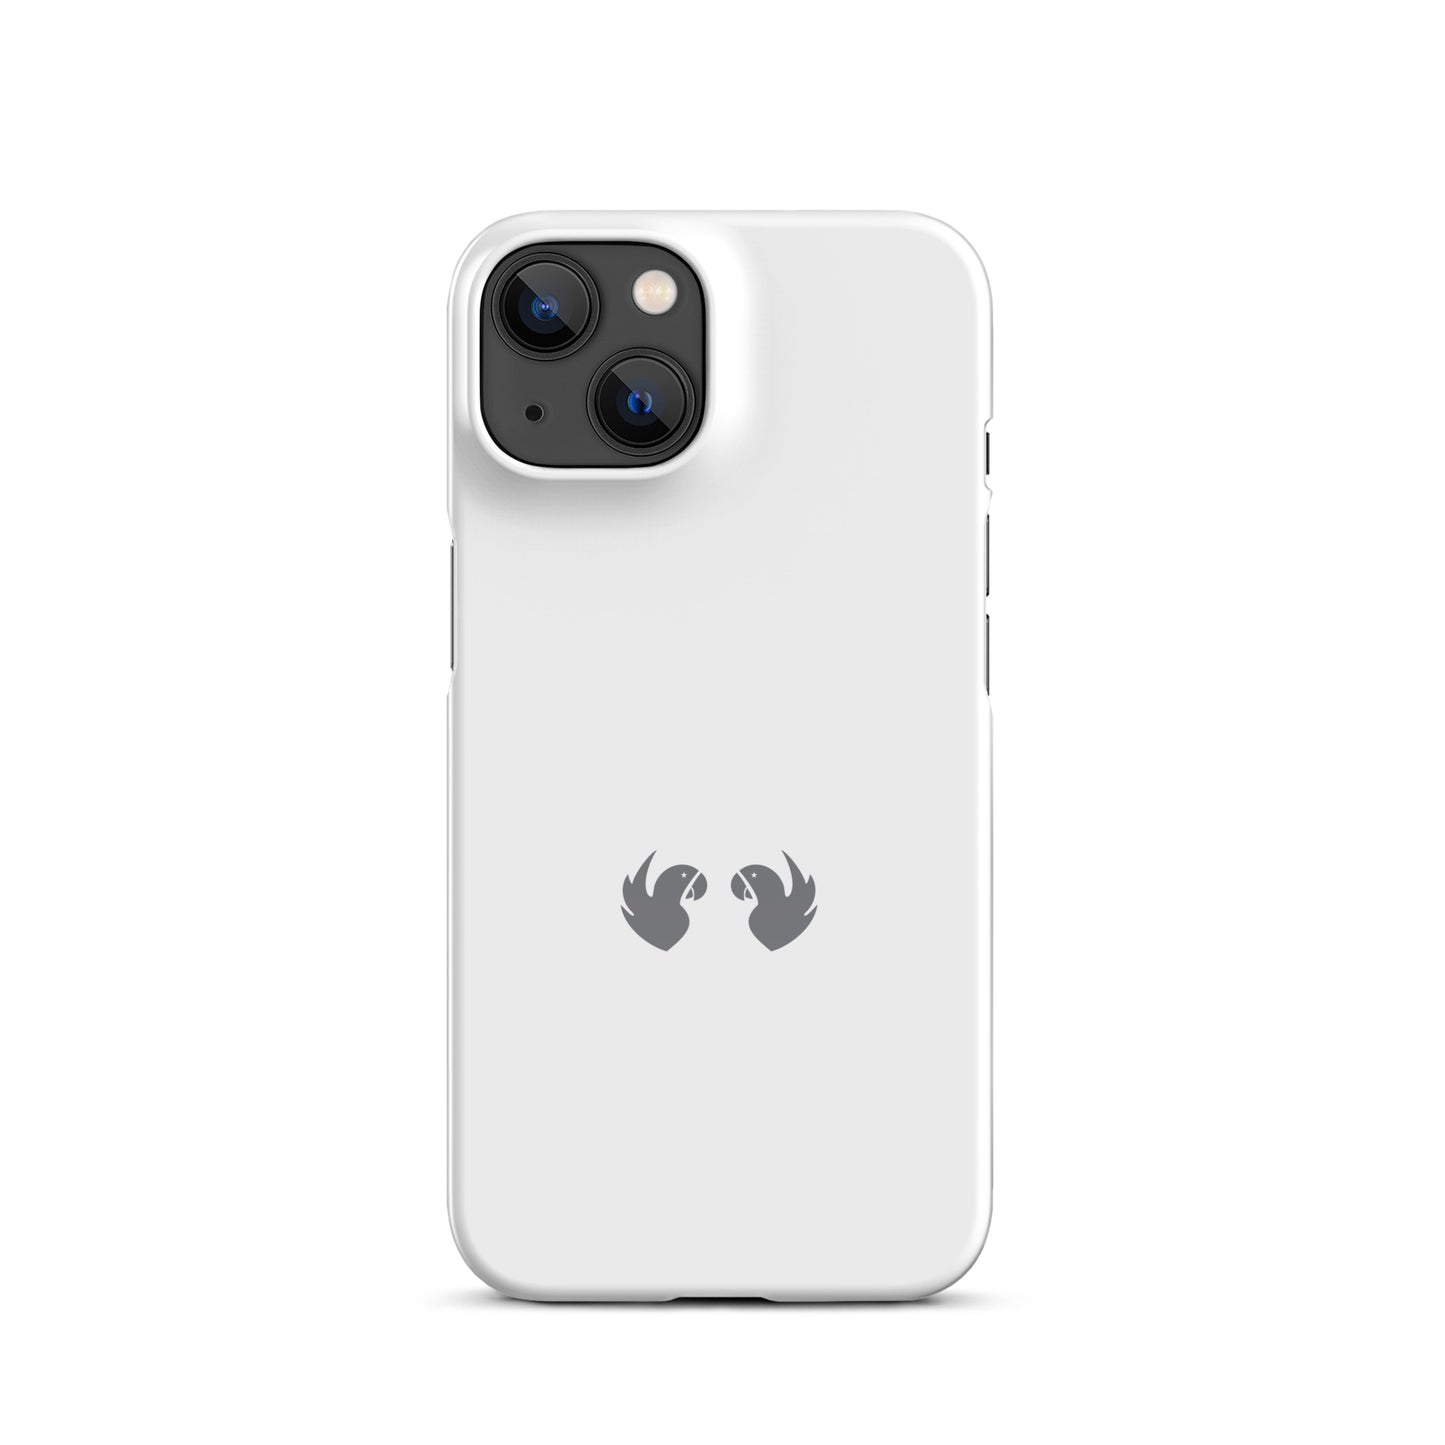 Snap & Charge iPhone Case: Ultra-Thin Wireless Friendly Protection